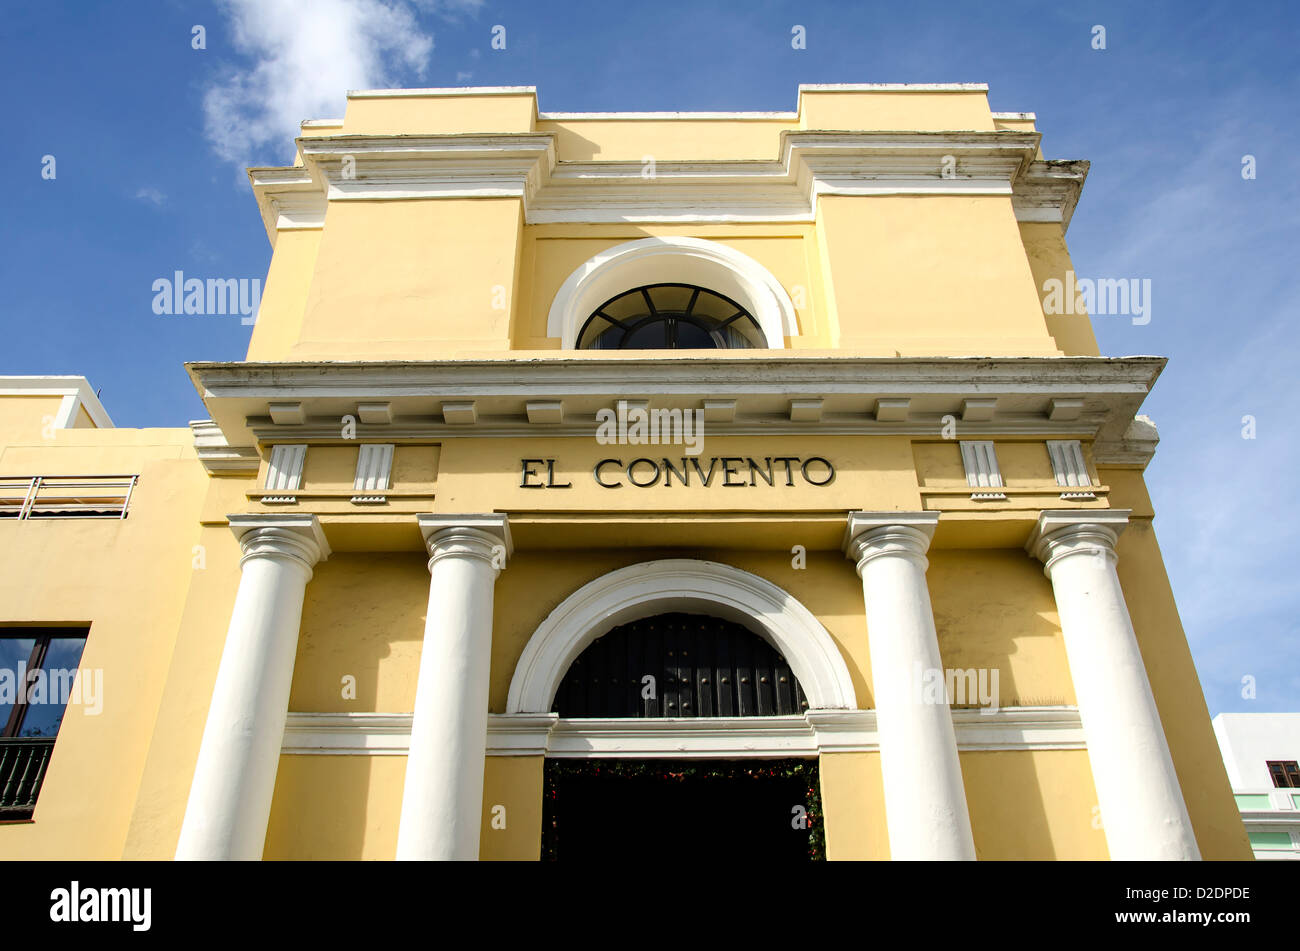 Entrance Hotel El Convento Hotel, located in an old nunnery, Old San Juan, Puerto Rico Stock Photo